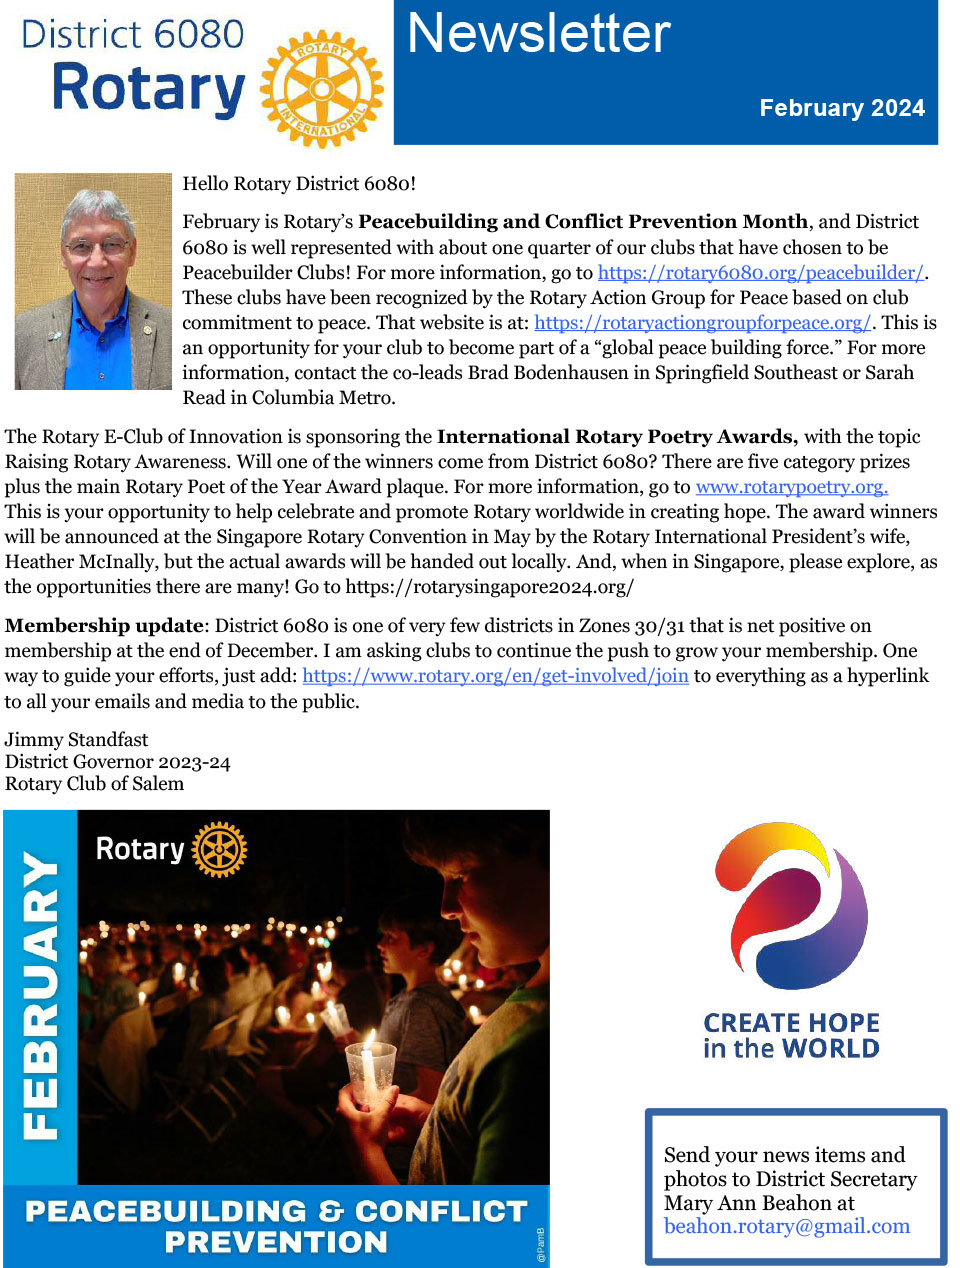 February 2024 District Newsletter